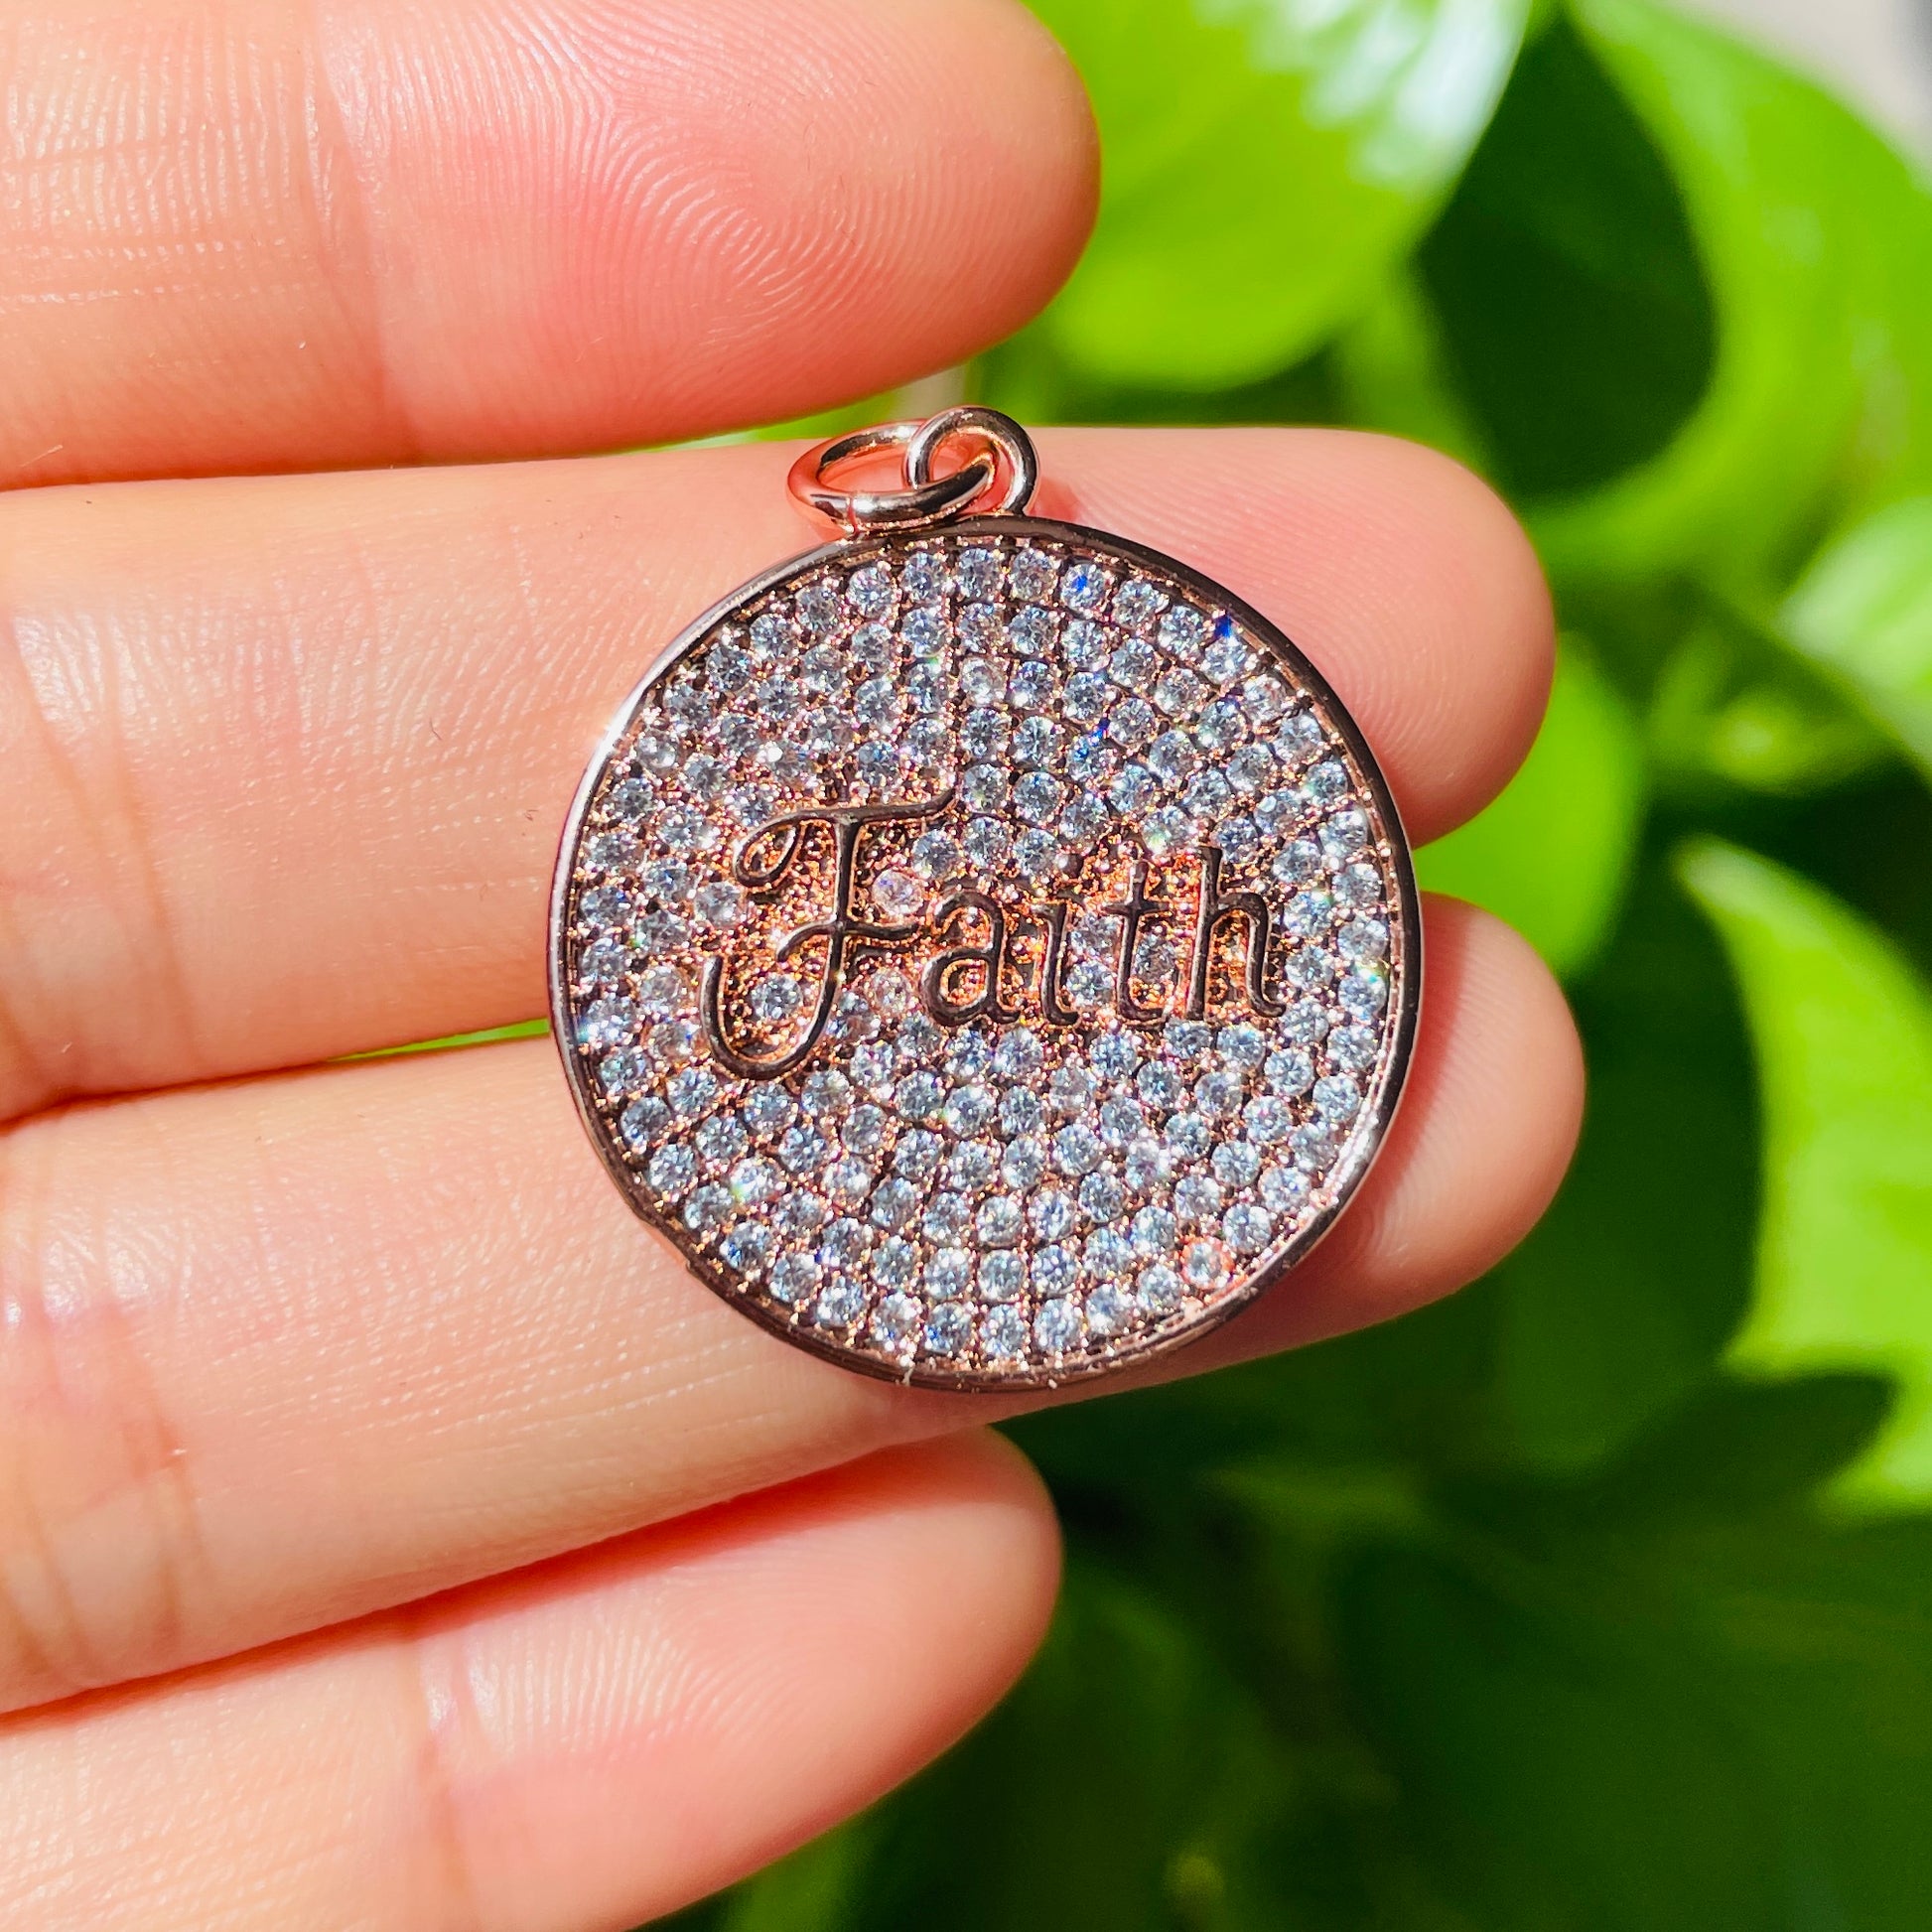 10pcs/lot 25mm CZ Pave Round Plate FAITH Quote Charms Rose Gold CZ Paved Charms Christian Quotes Discs On Sale Charms Beads Beyond